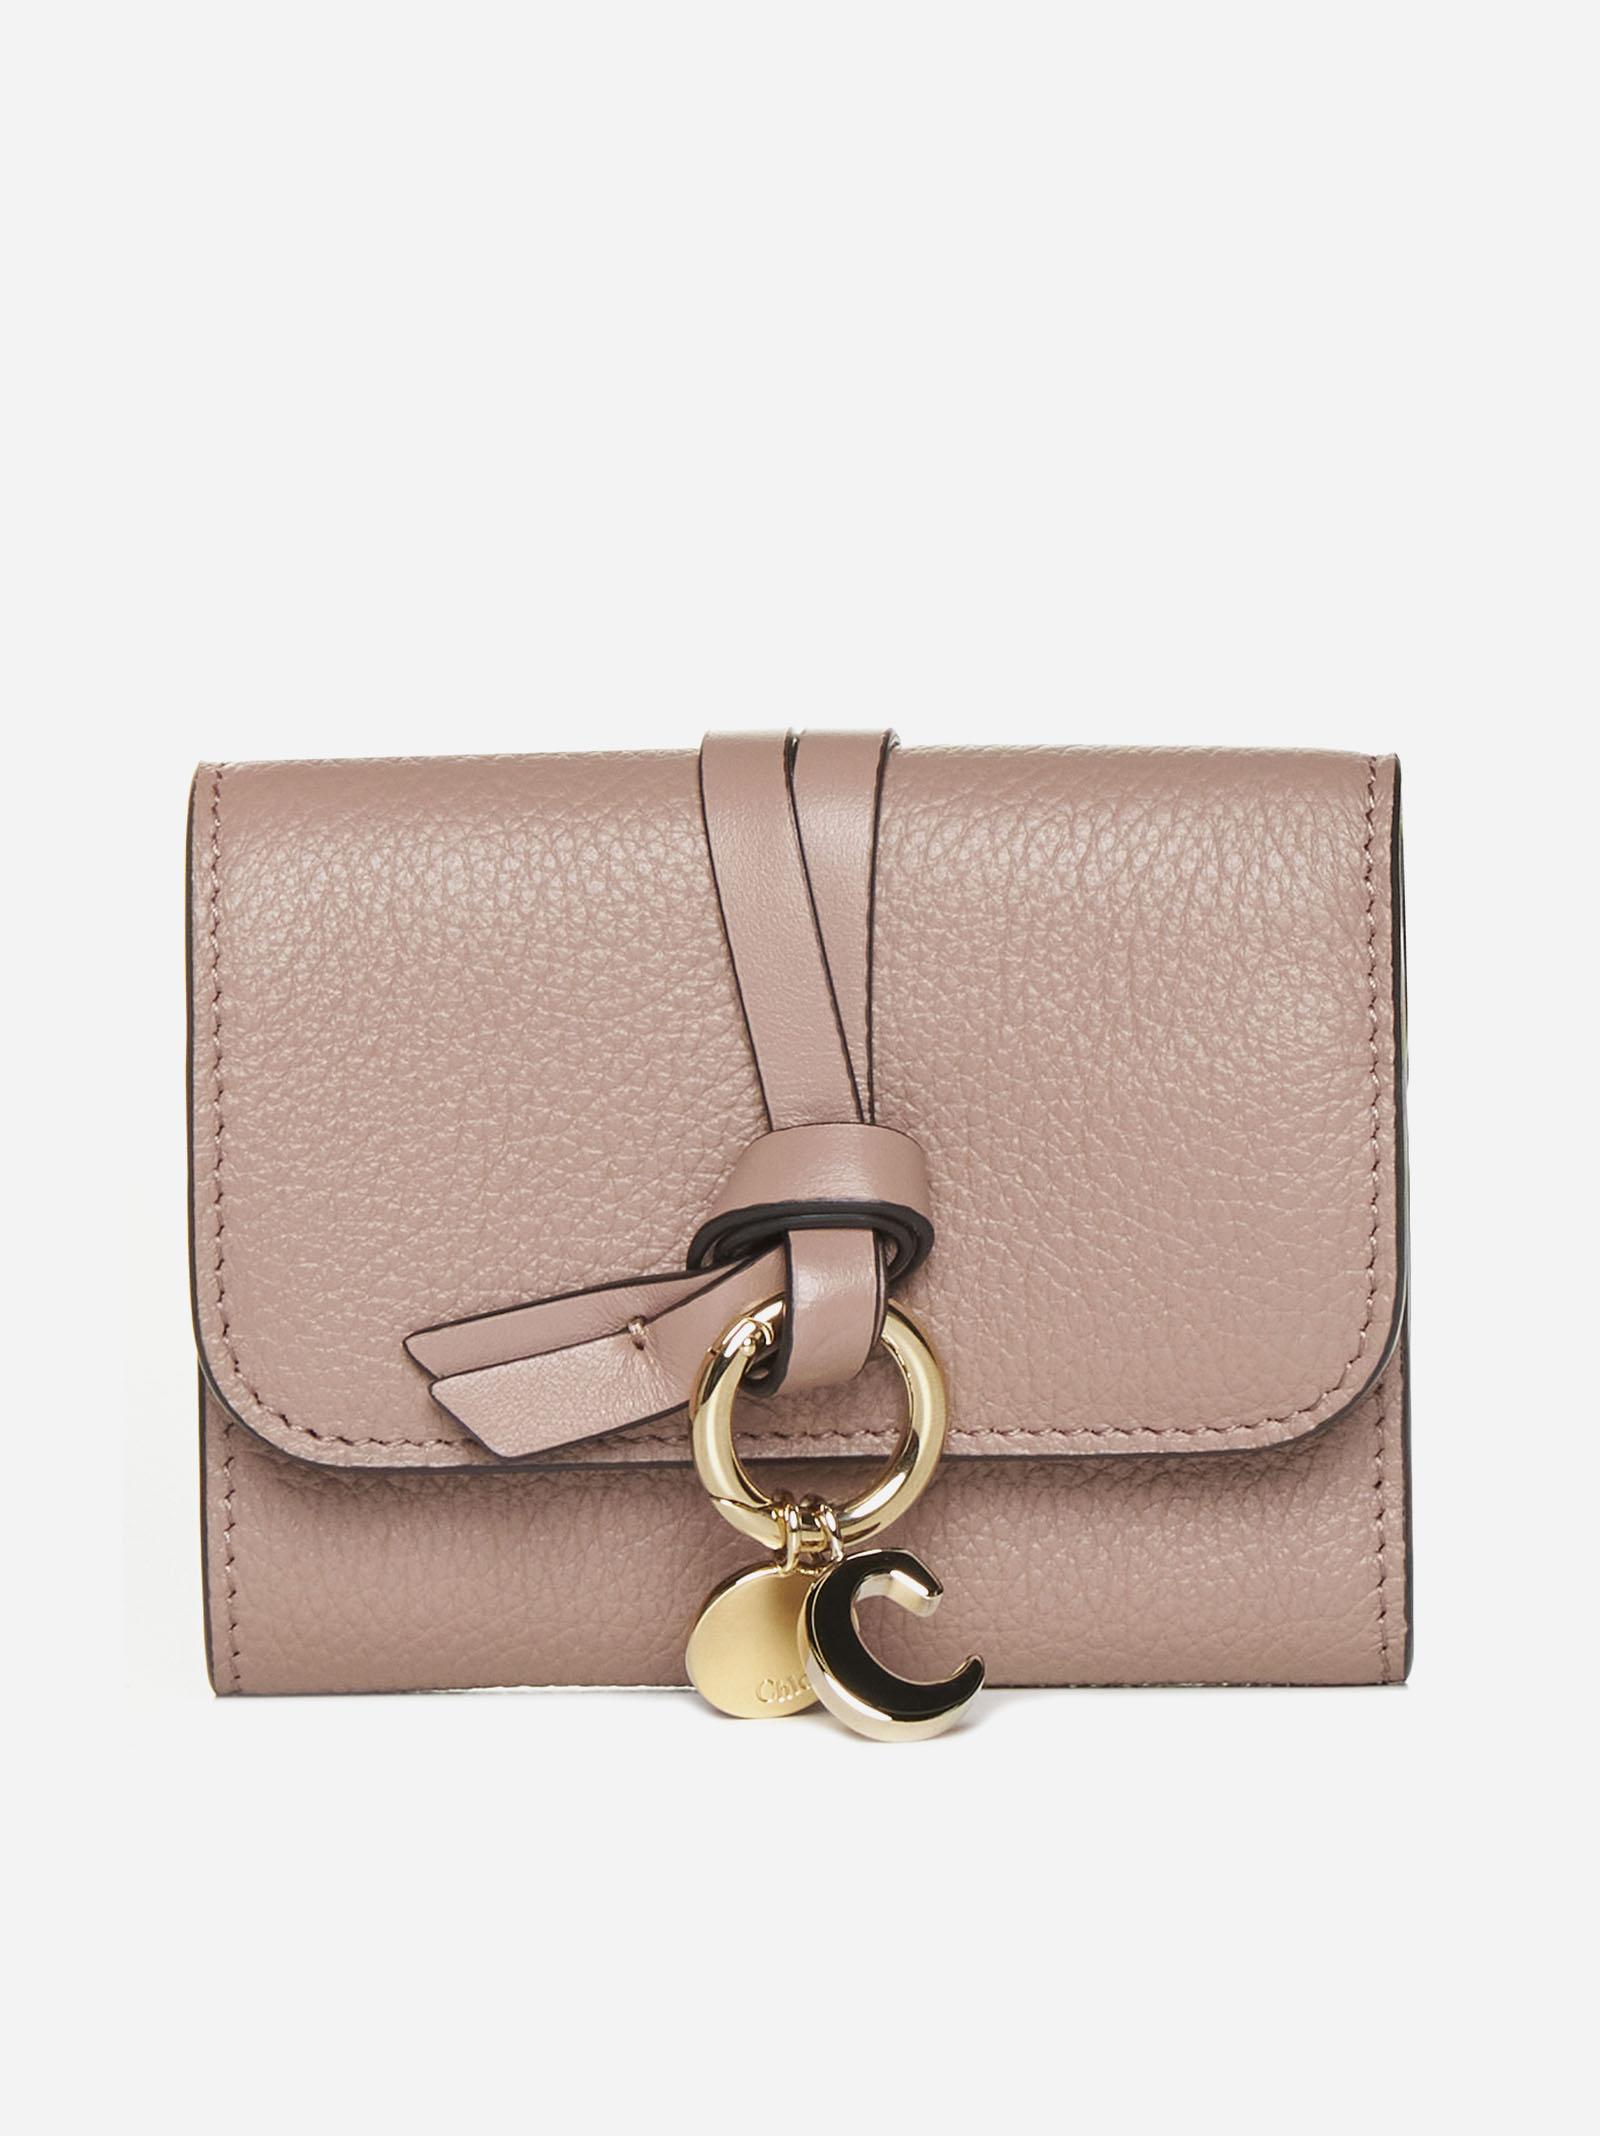 Chloé Alphabet Leather Wallet in Natural   Lyst